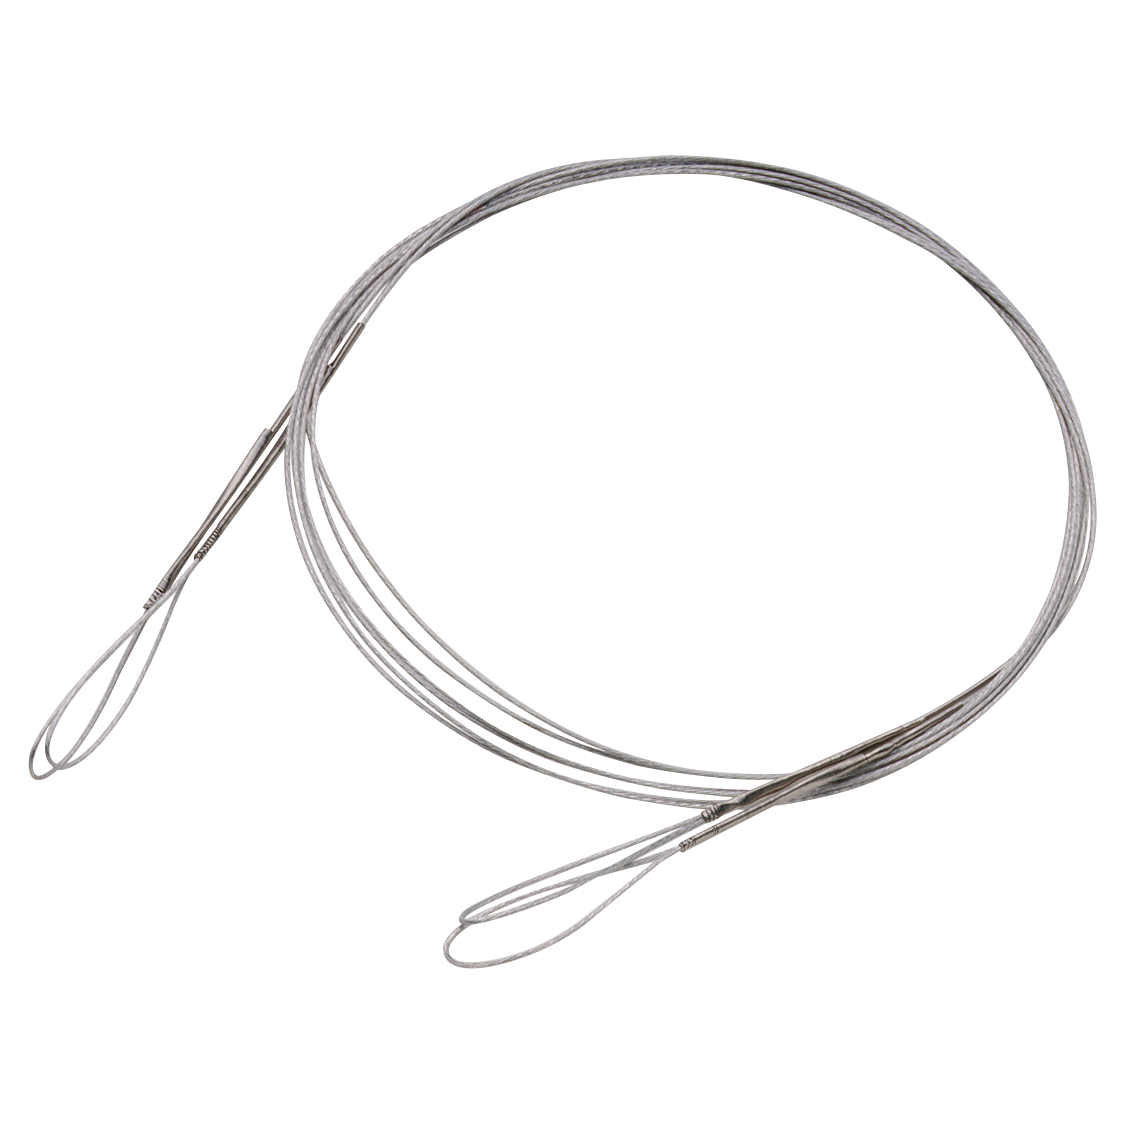 Perca Original Wire Leader with 2 loops 